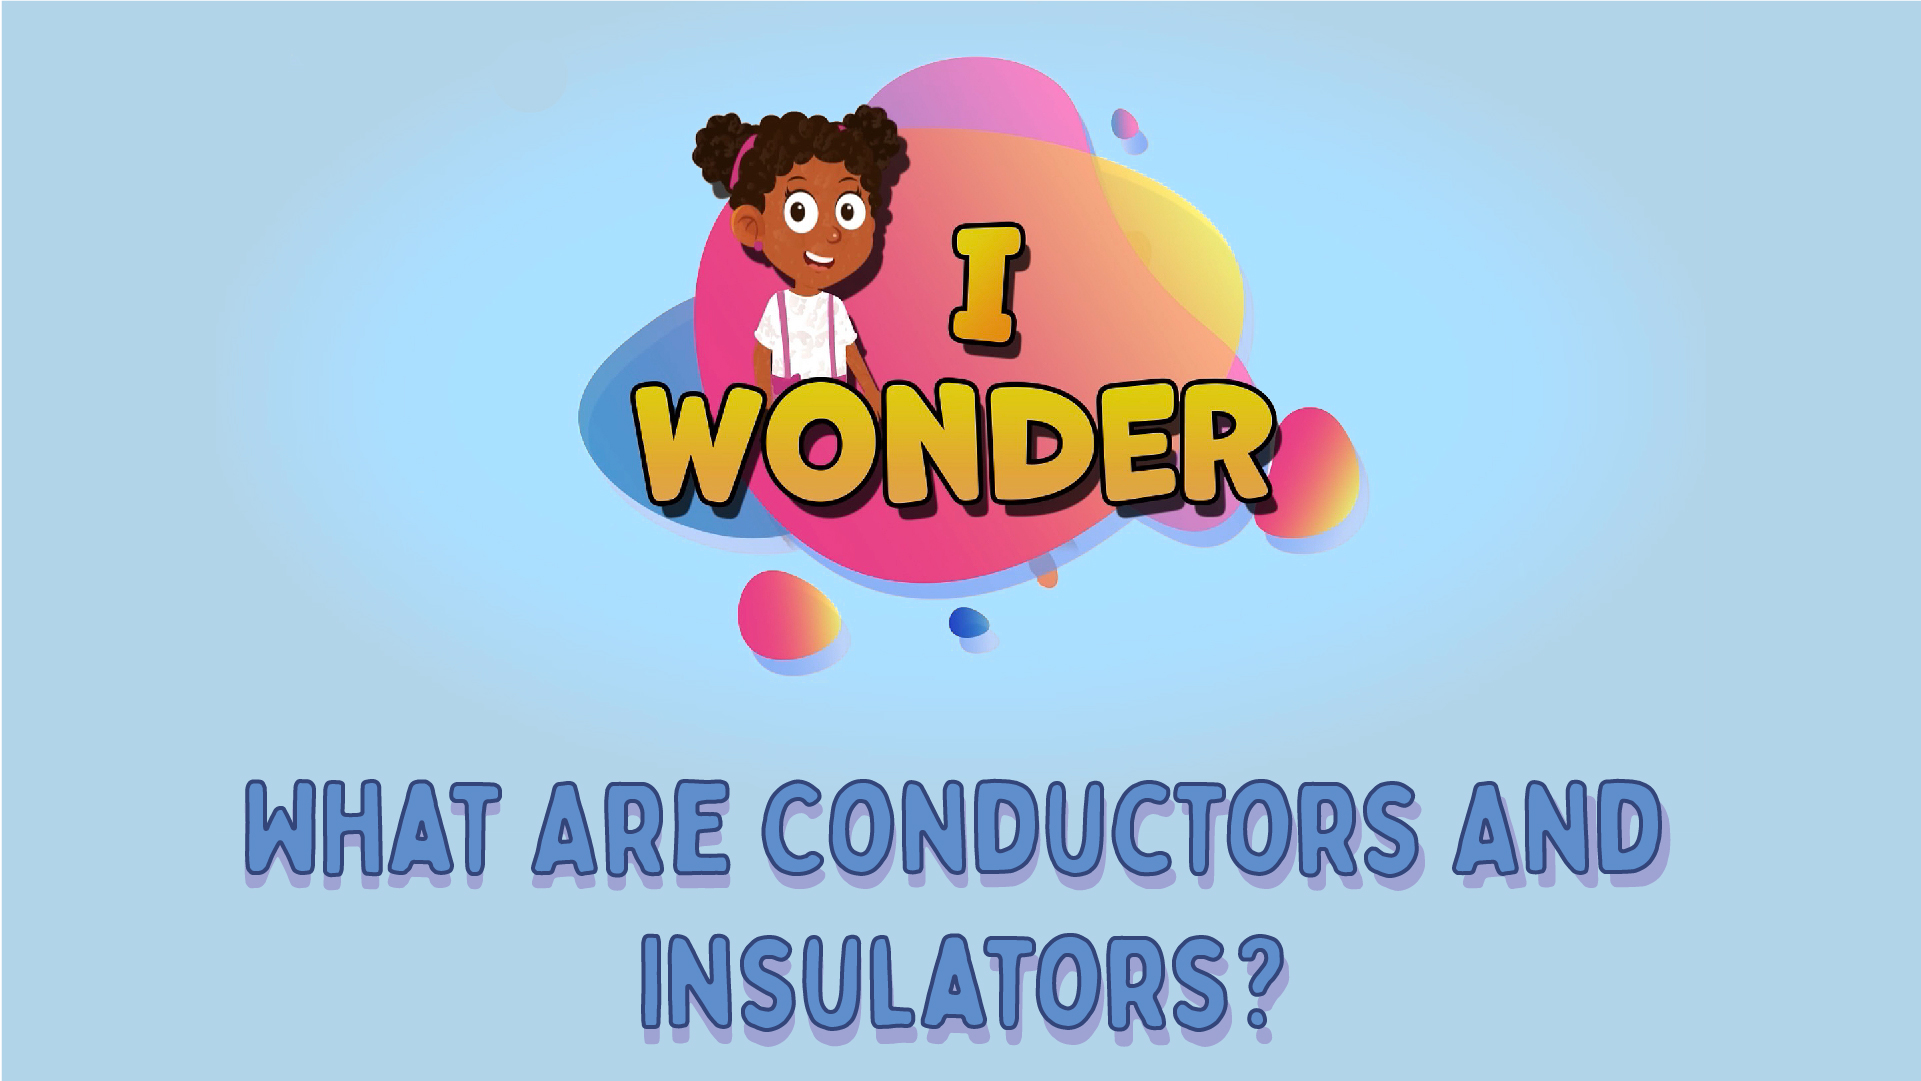 What Are Conductors And Insulators?